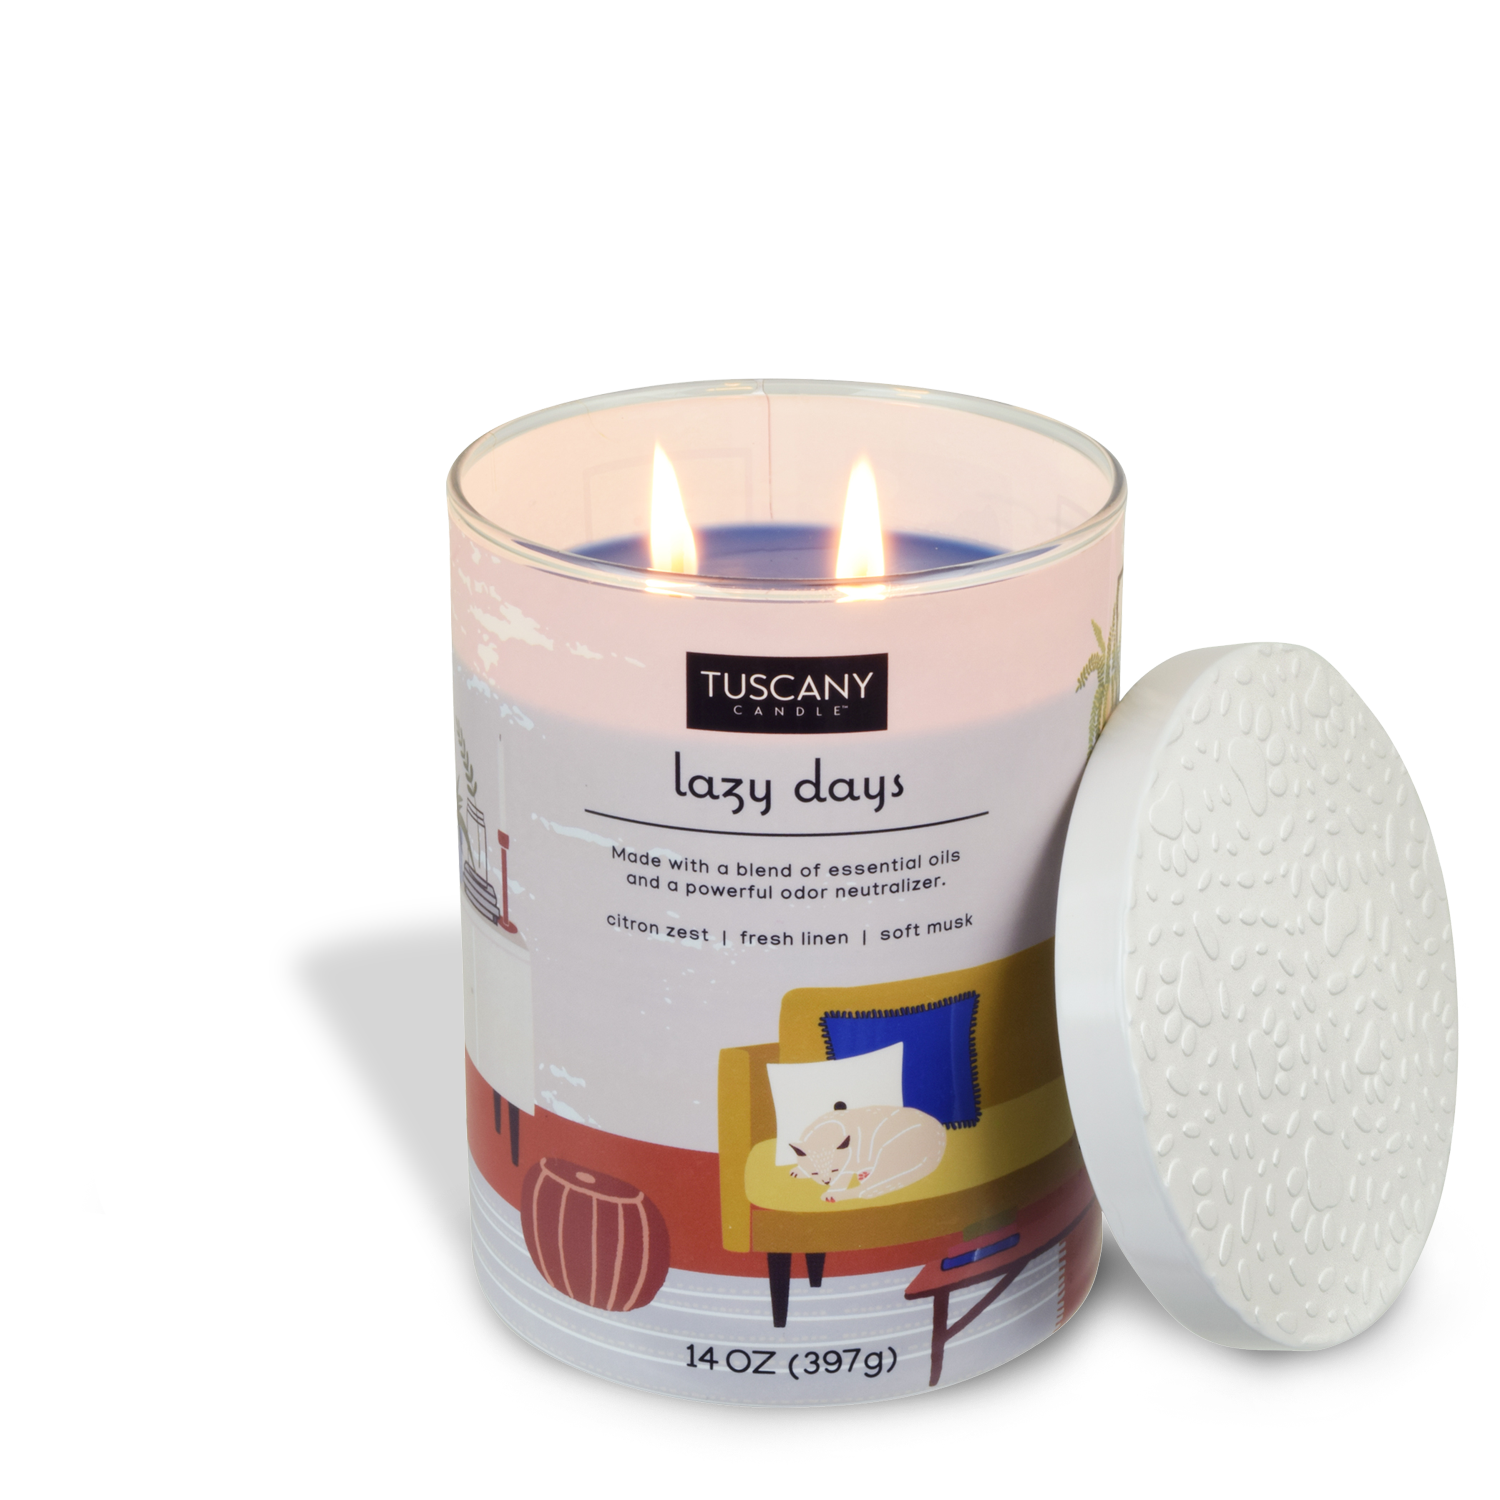 Tuscany Candle® EVD neutralizes odors with enzymes for Pet Odor Control using the Lazy Days Scented Jar Candle (14 oz) – Pet Odor Control Collection.